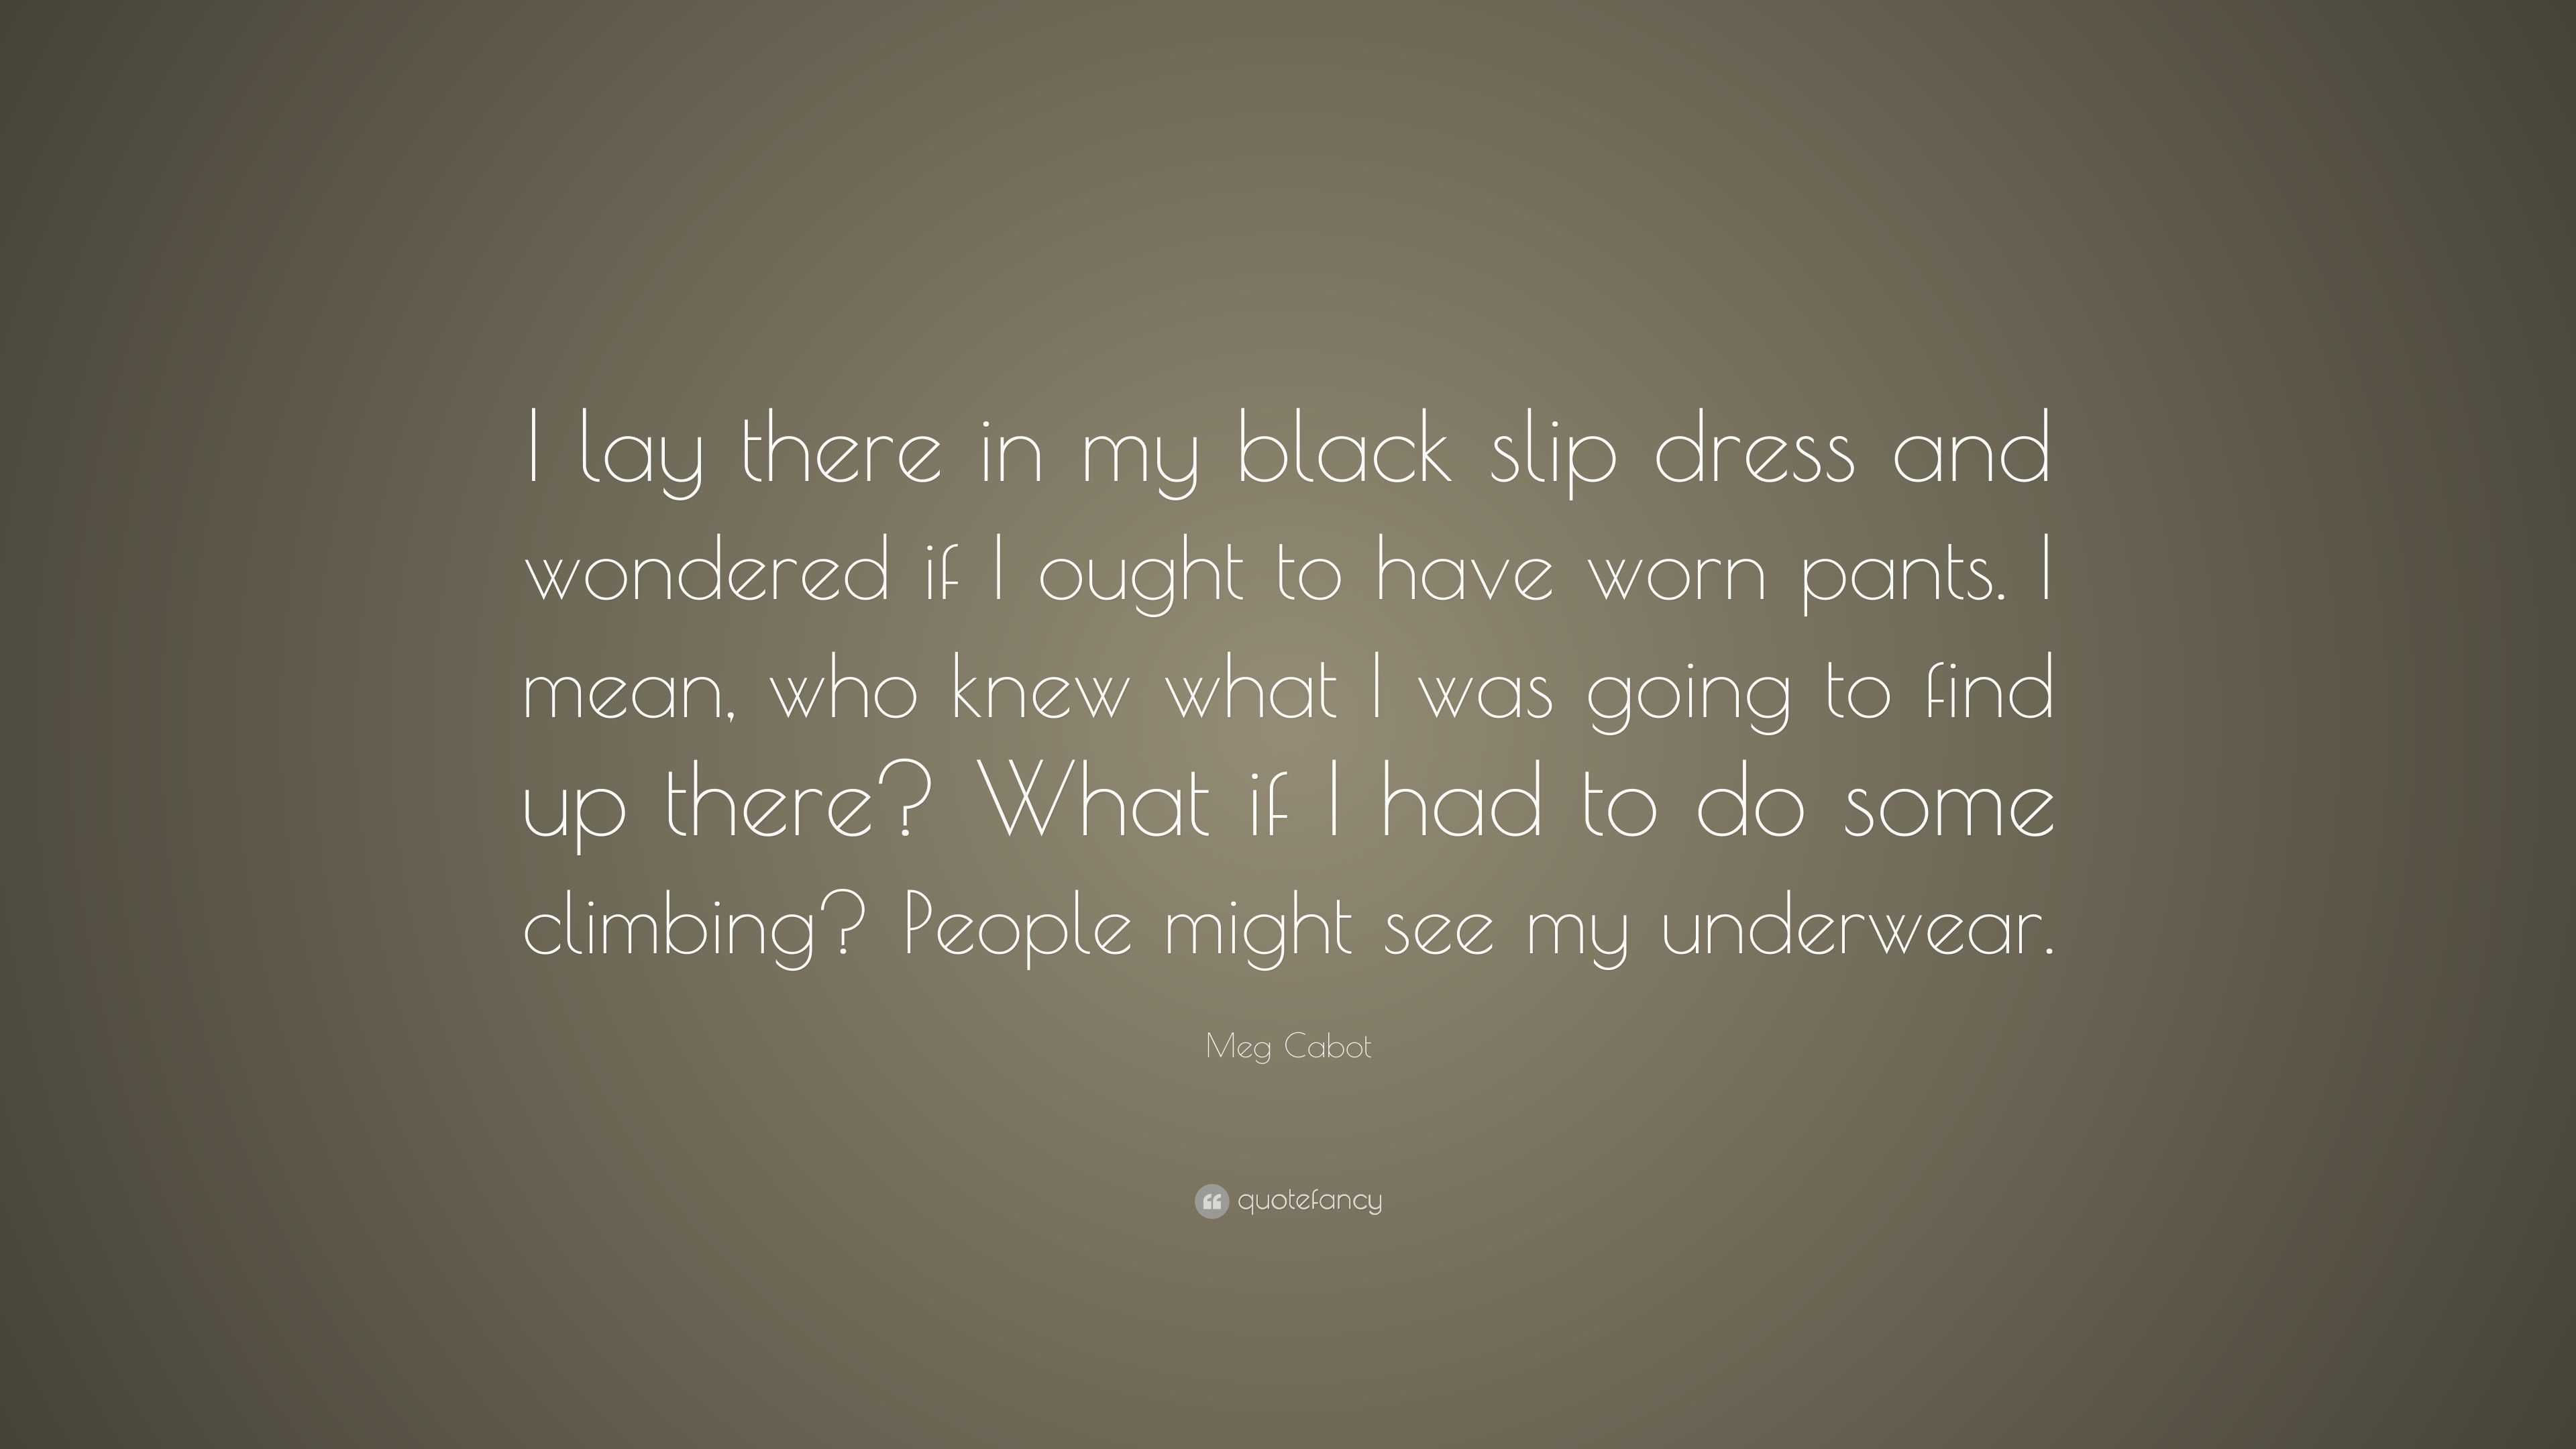 Meg Cabot Quote: “I lay there in my black slip dress and wondered ...